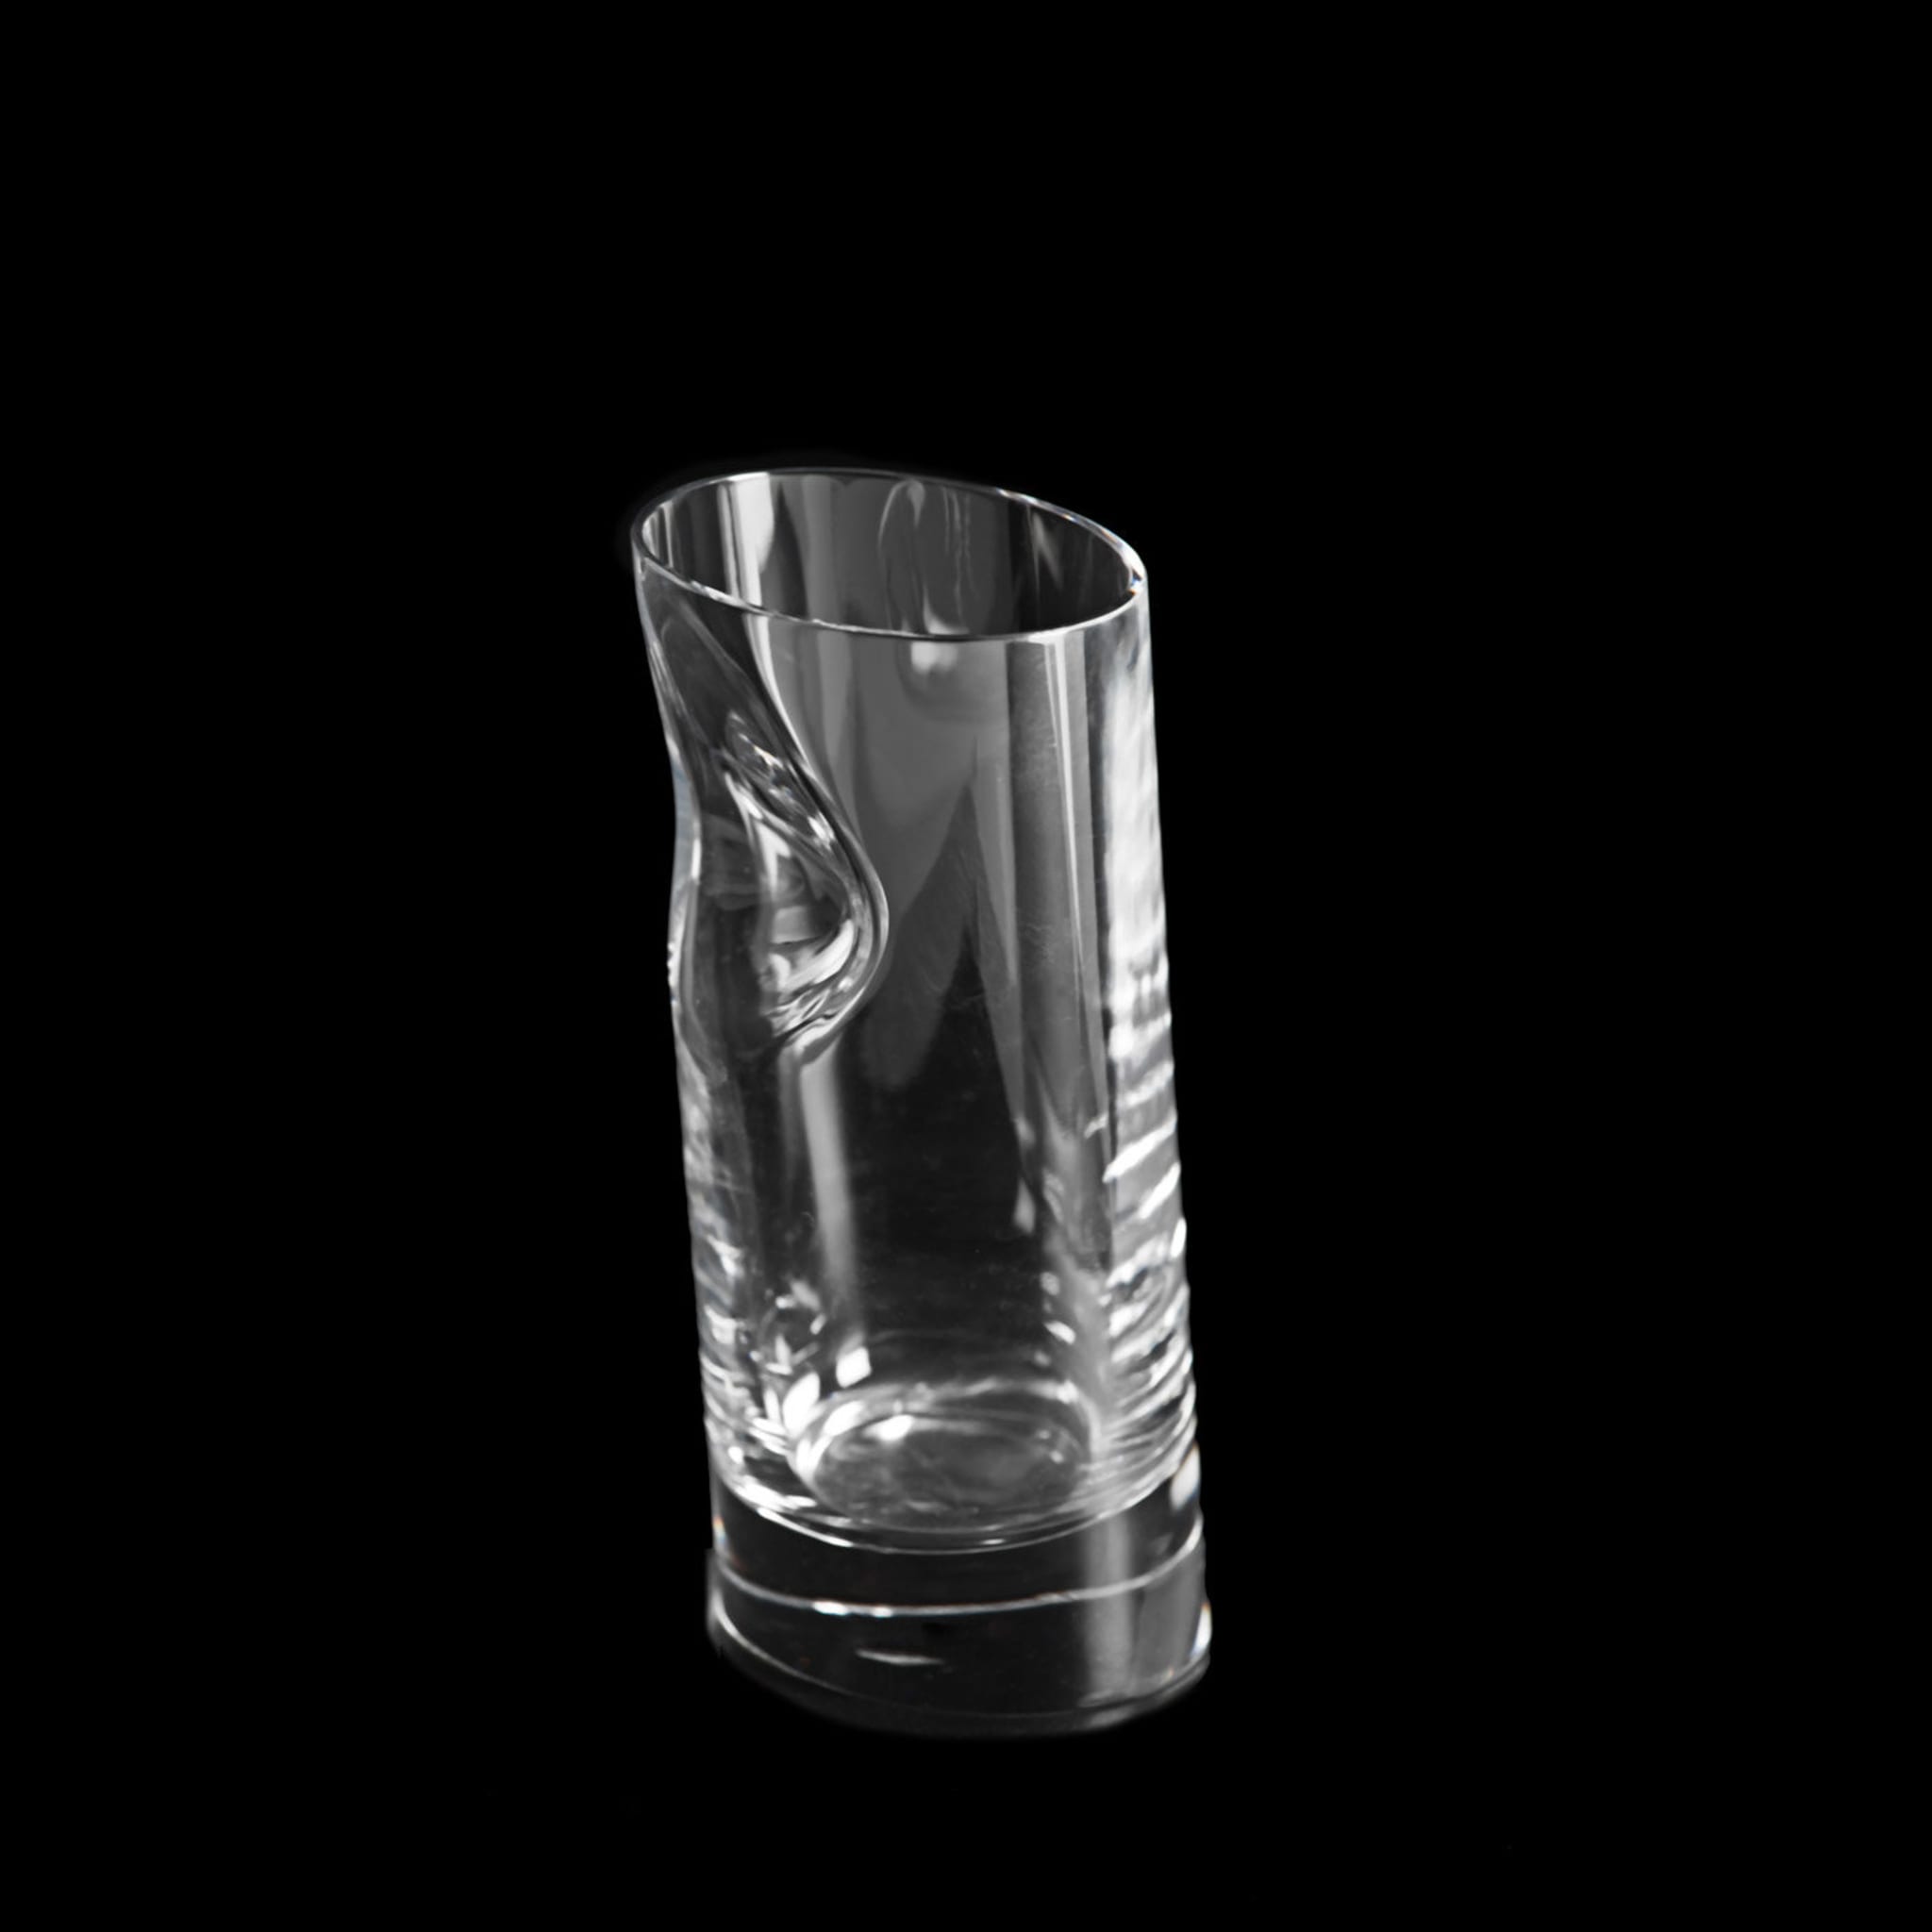 Set of 6 Ice Stopper Tall Crystal Whisky Glasses by Angelo Mangiarotti - Alternative view 3